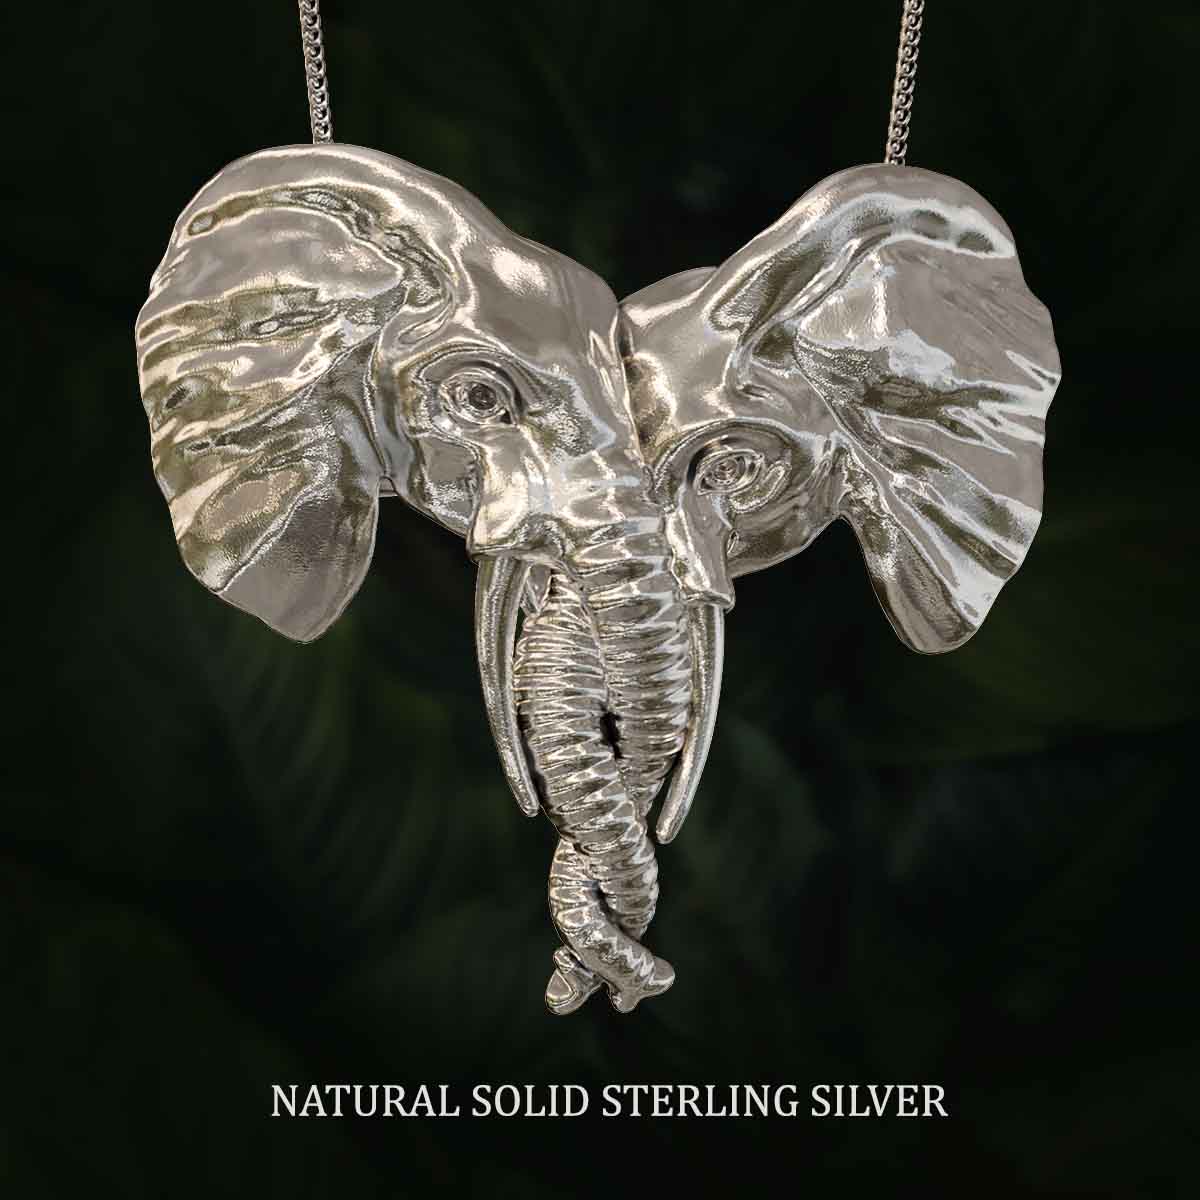     Natural-Satin-Polish-Solid-Sterling-Silver-Elephant-Heads-with-Trunks-Entwined-Pendant-Jewelry-For-Necklace